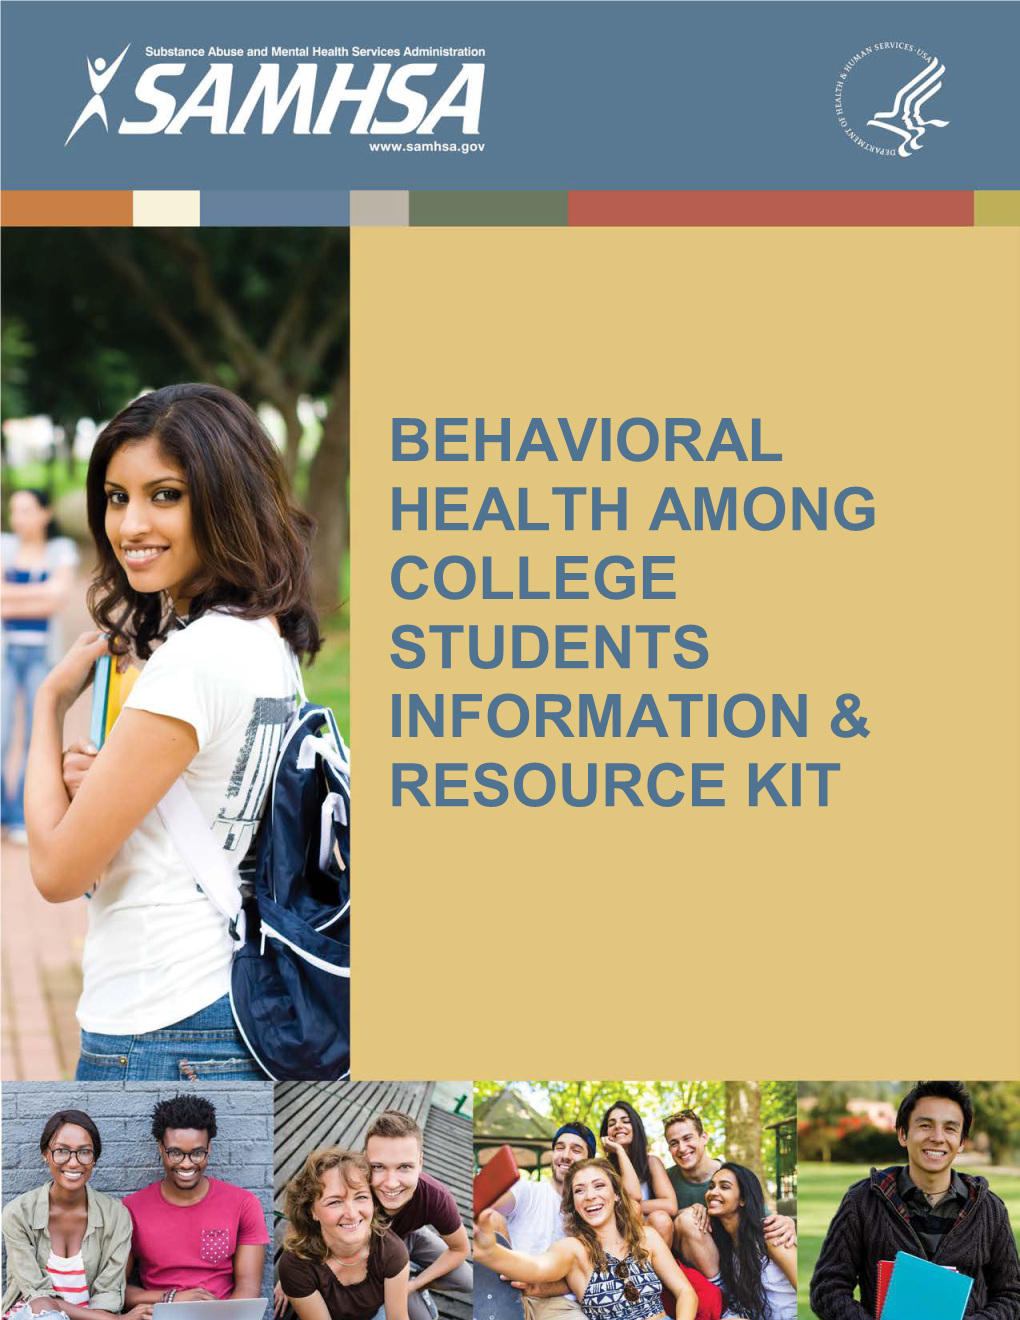 Behavioral Health Among College Students Information and Resource Kit PDF 4.57 MB